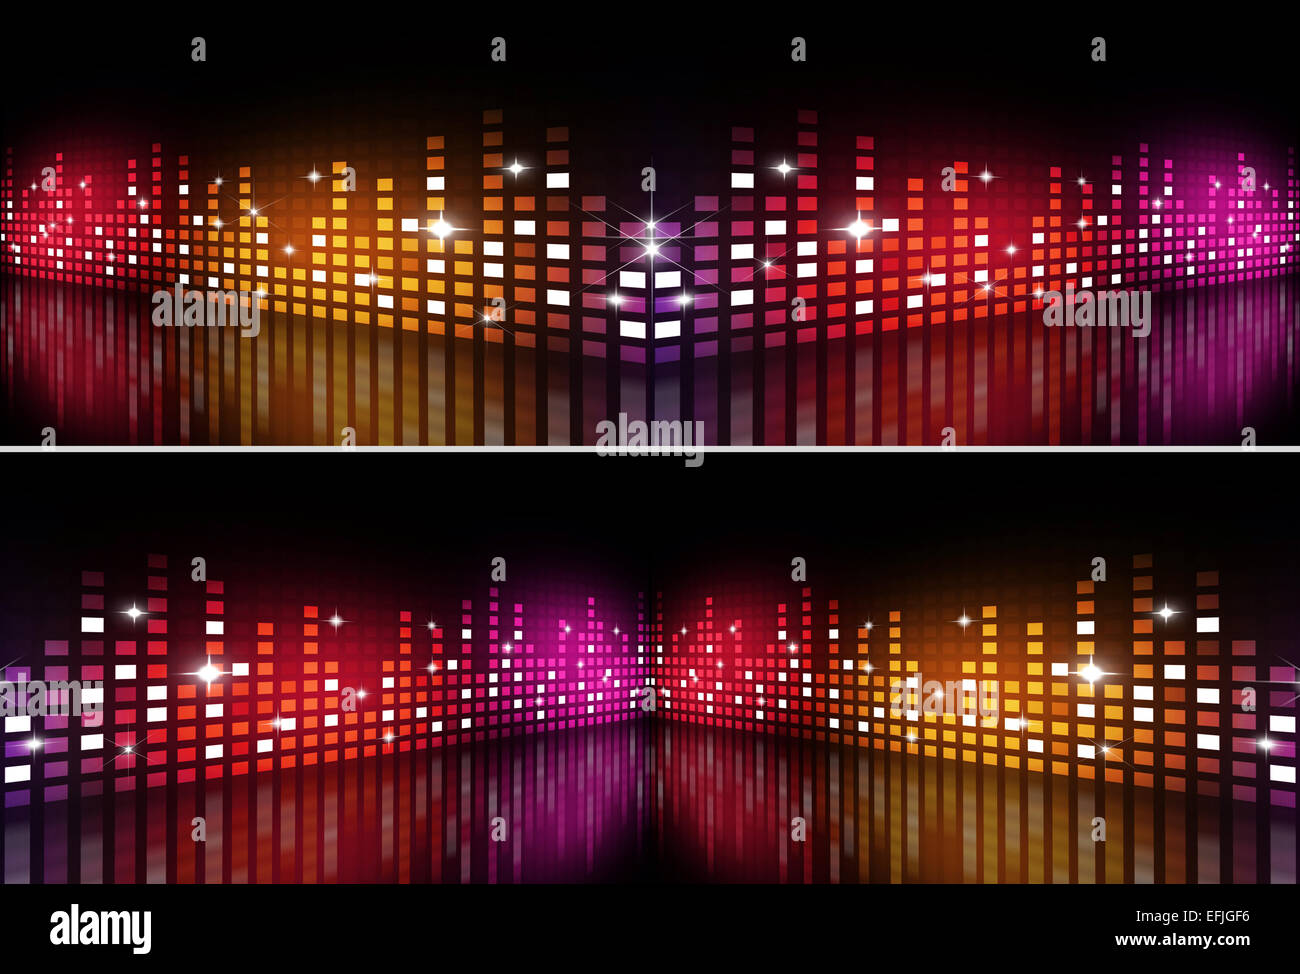 abstract music equalizer multicolor banners for active party events Stock Photo